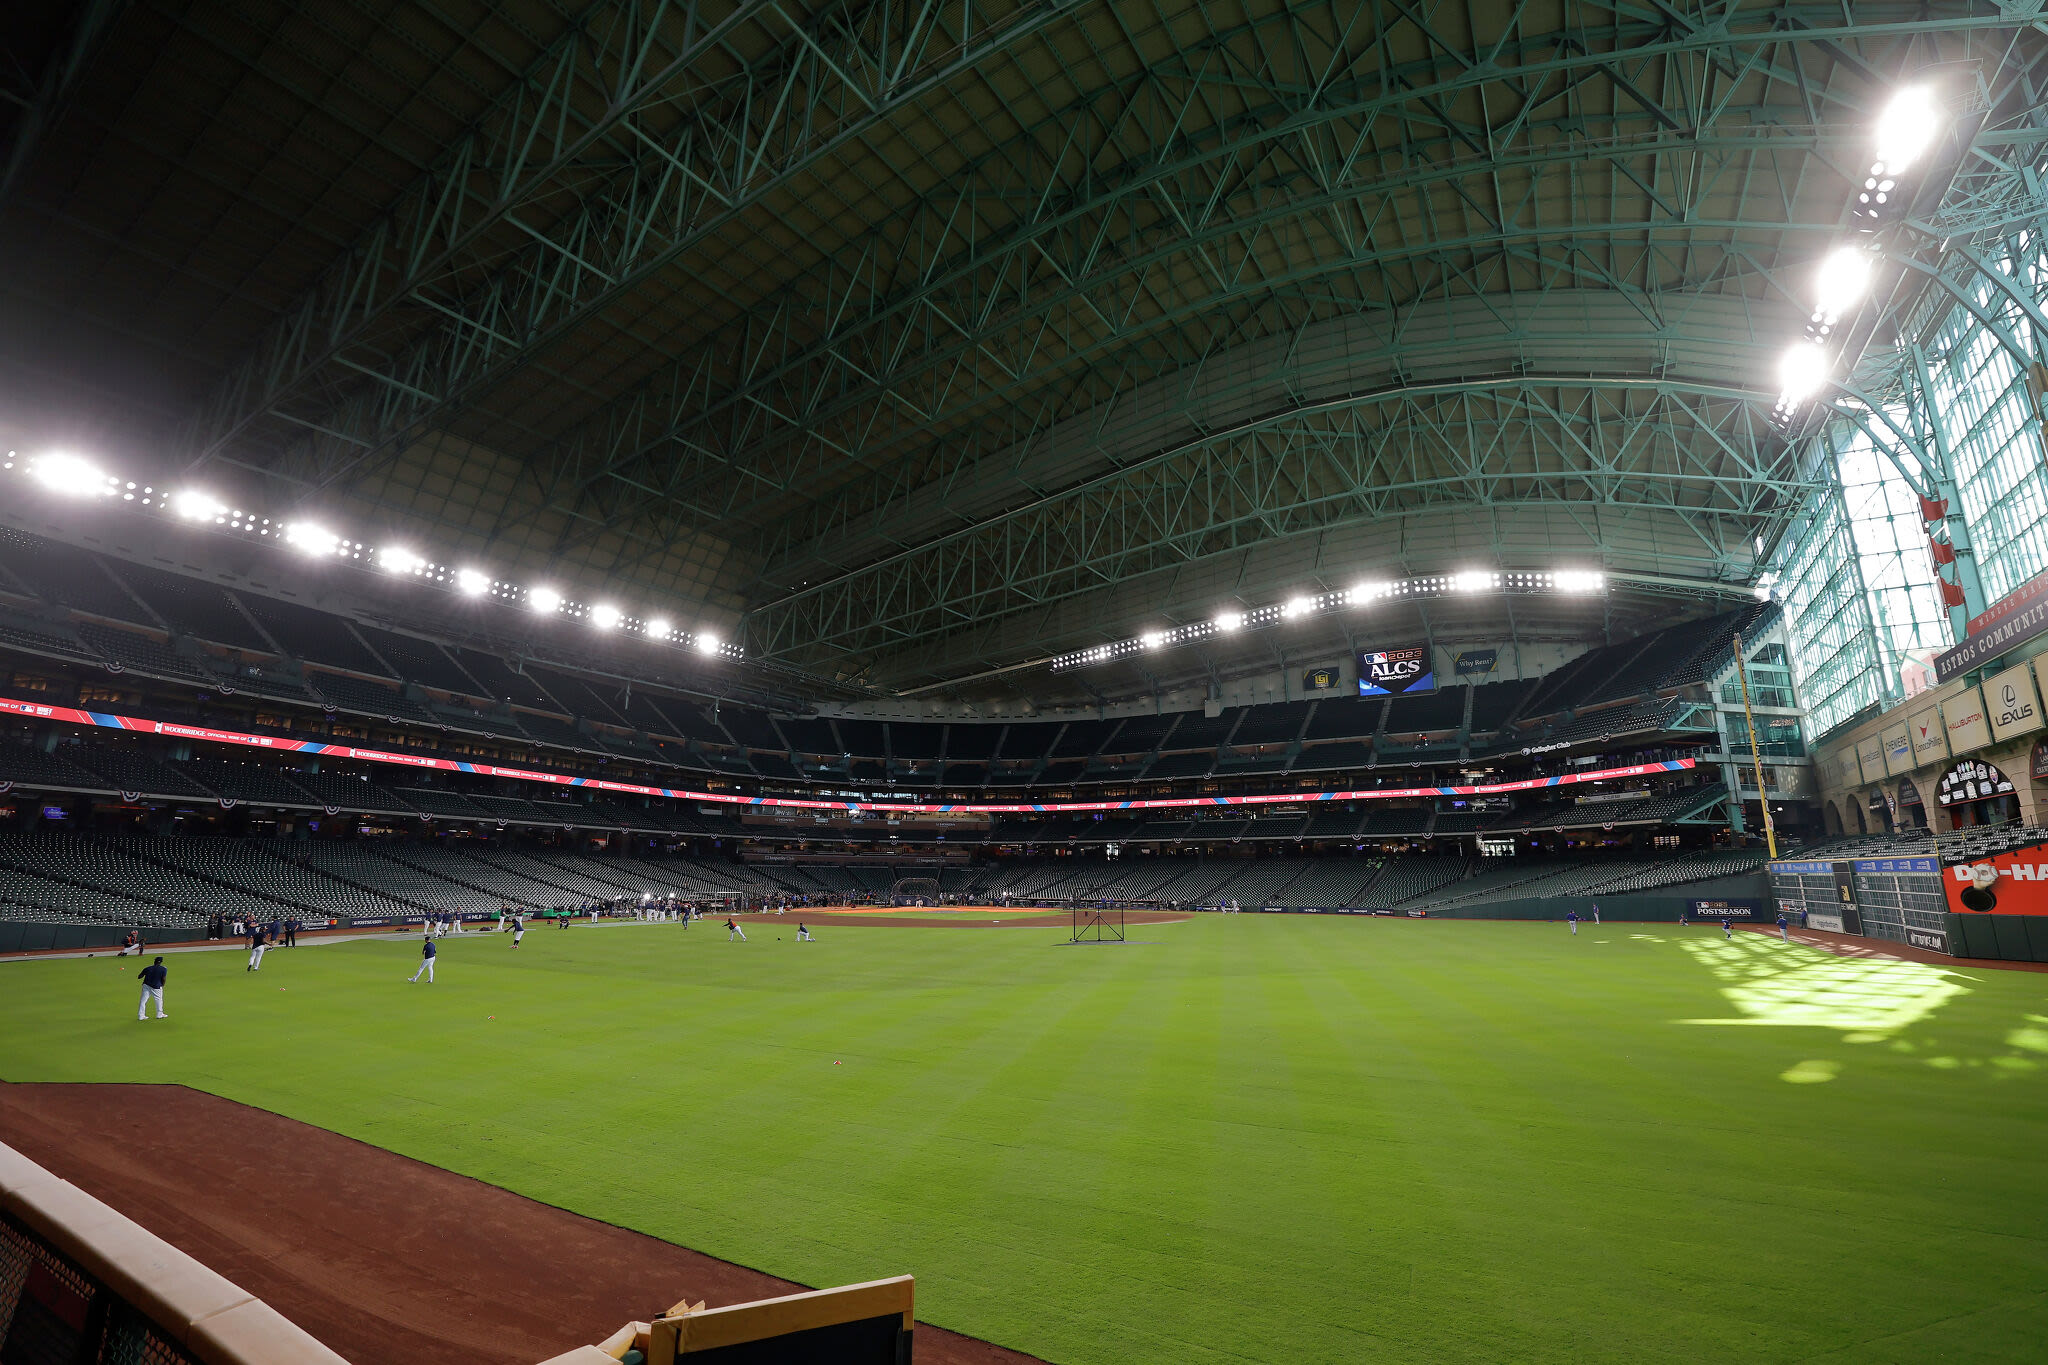 Astros vs. Brewers still on as Houston recovers from wild storm